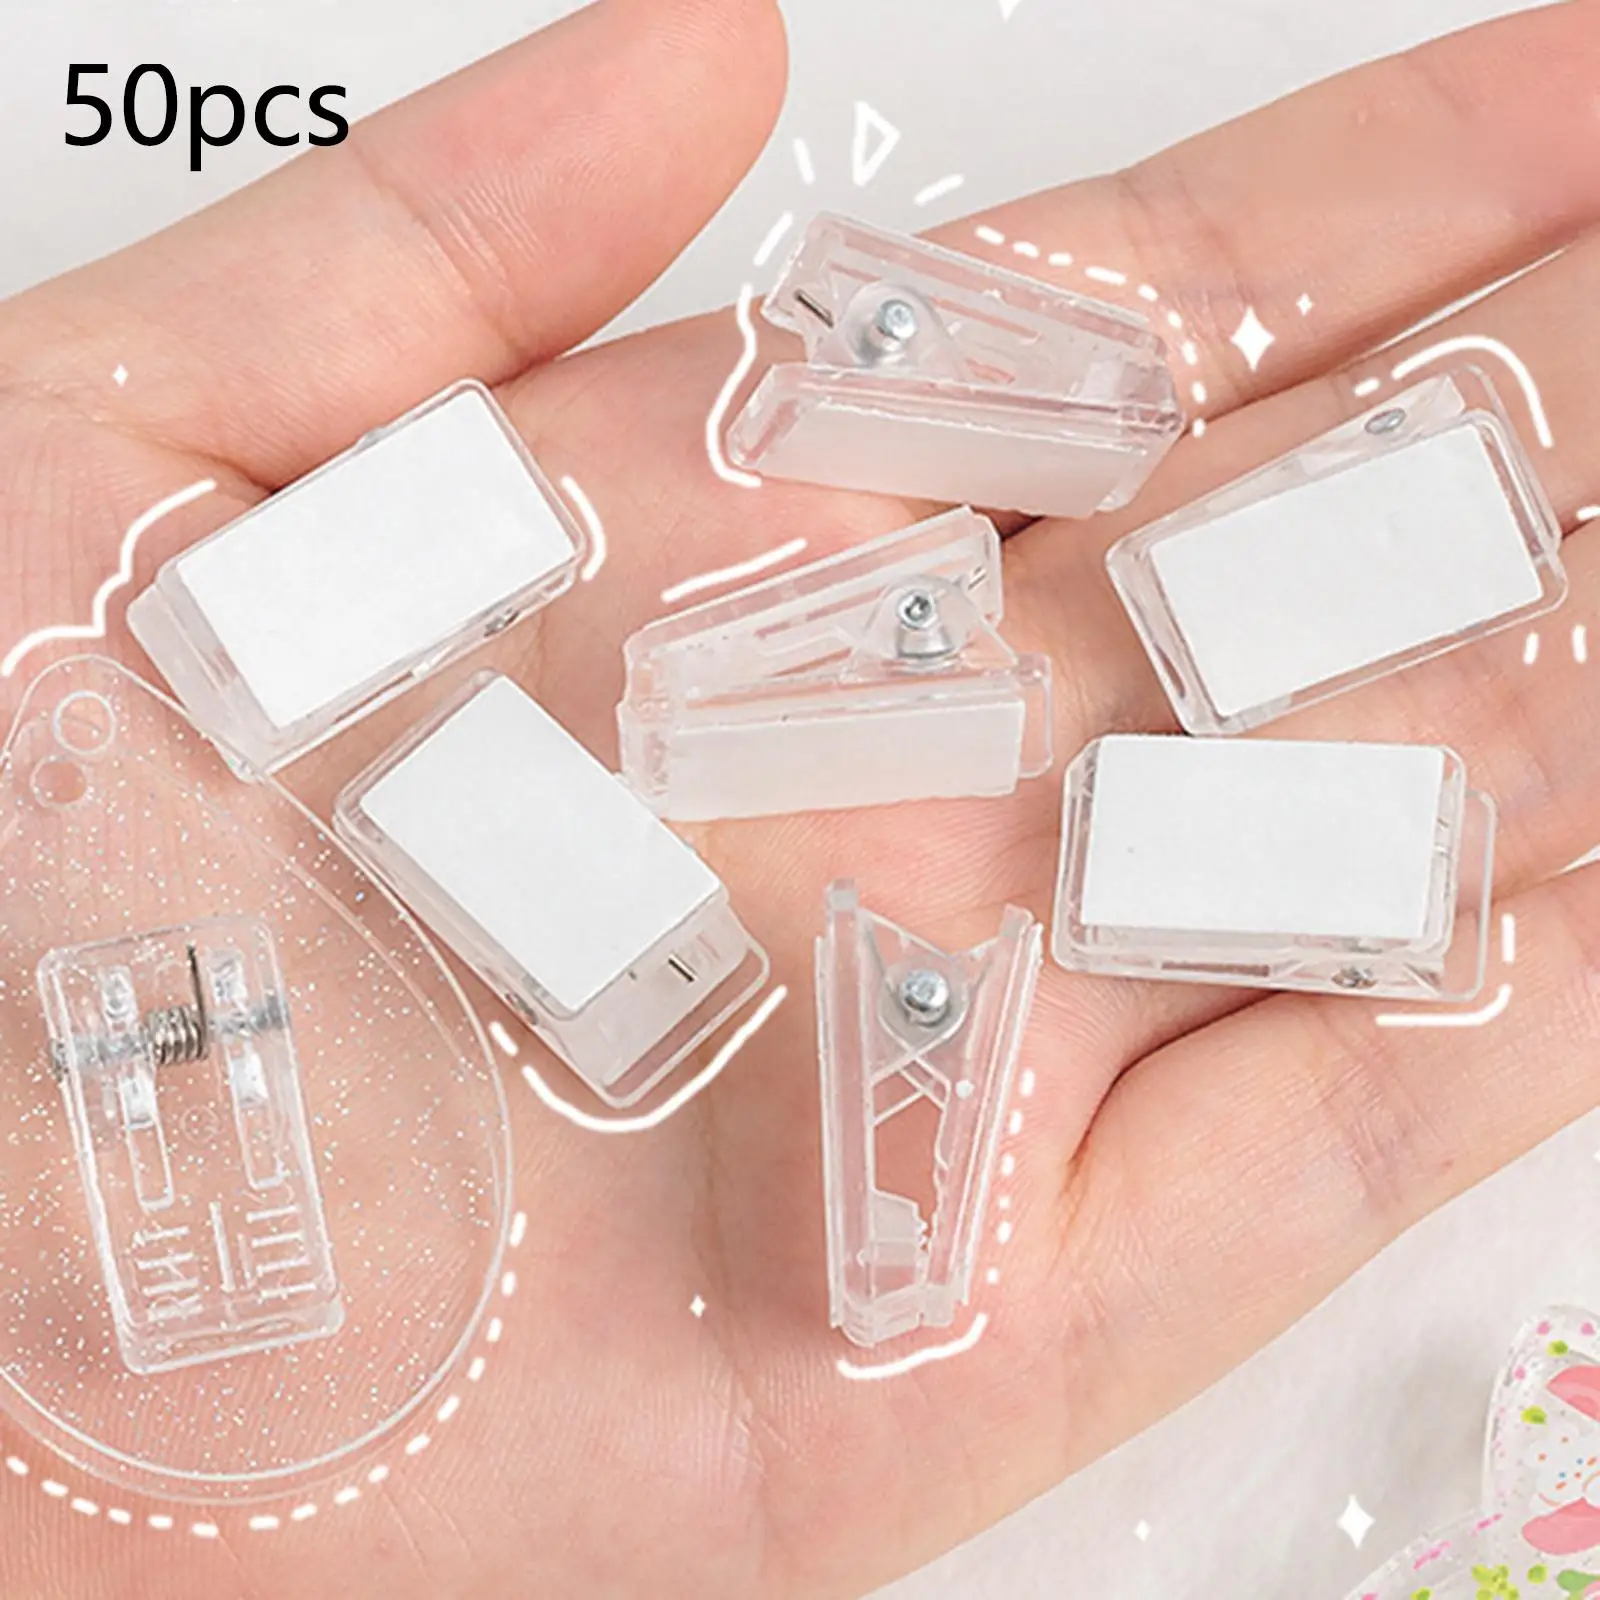 50Pcs Double Sided Adhesive Spring Clips Plastic Photo Clips Double Sided Adhesive Photo Clips Wall Decoration